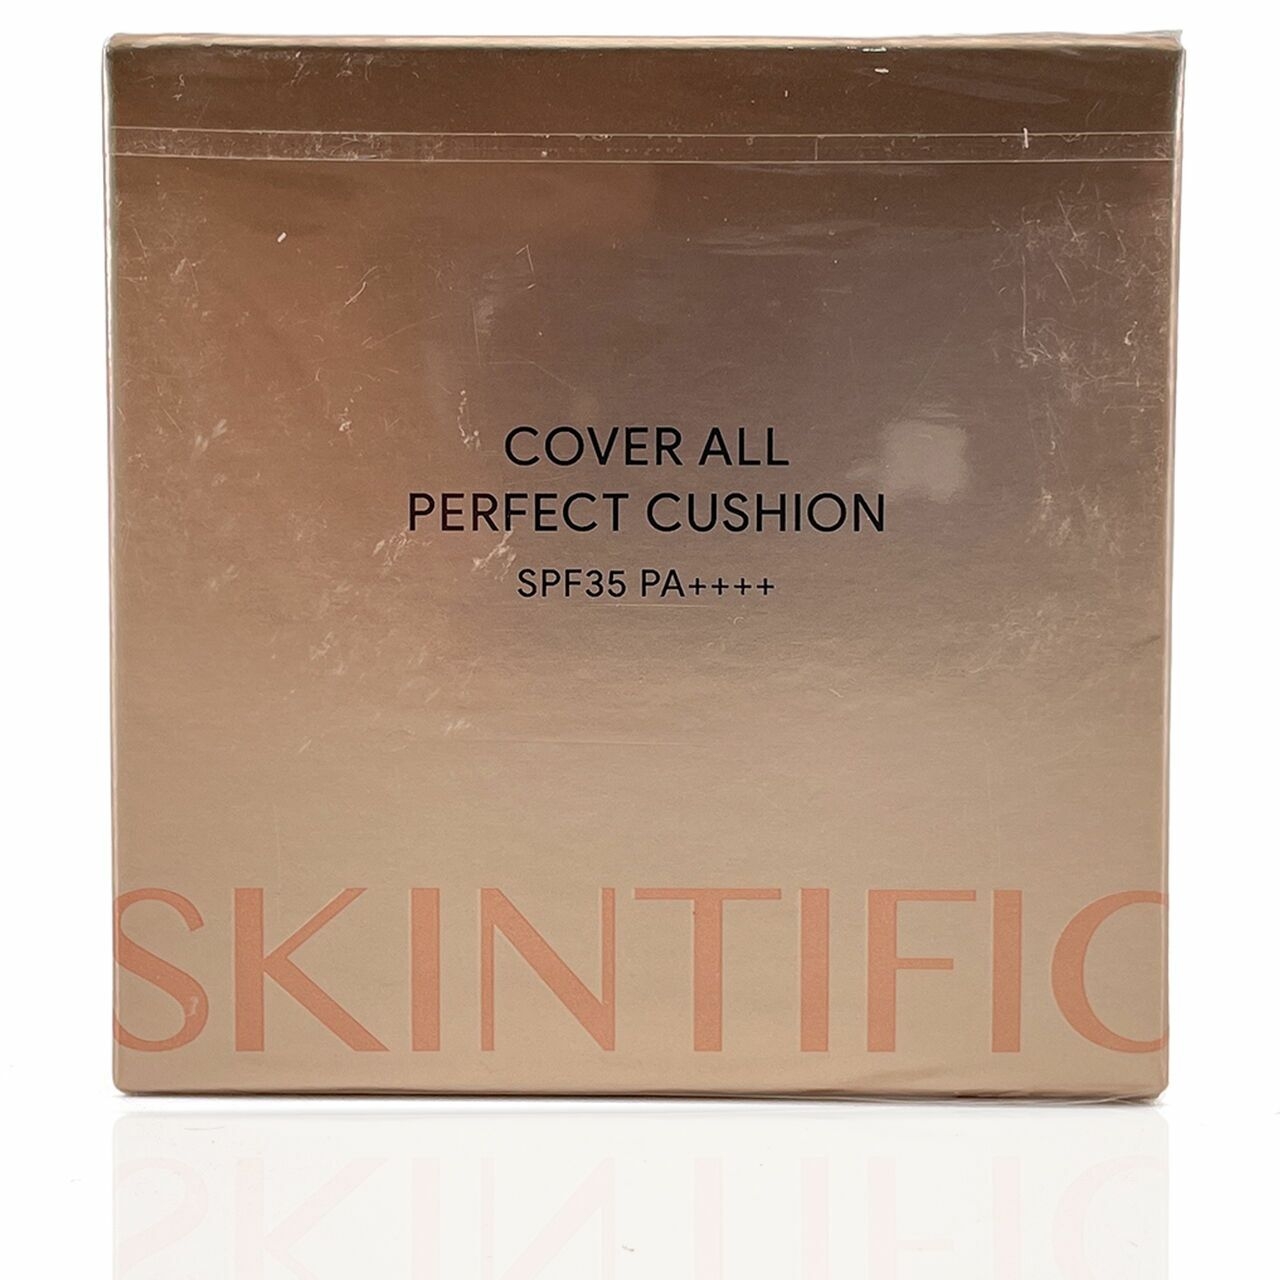 Skintific Cover All Perfect Cushion SP35 PA++++ Faces